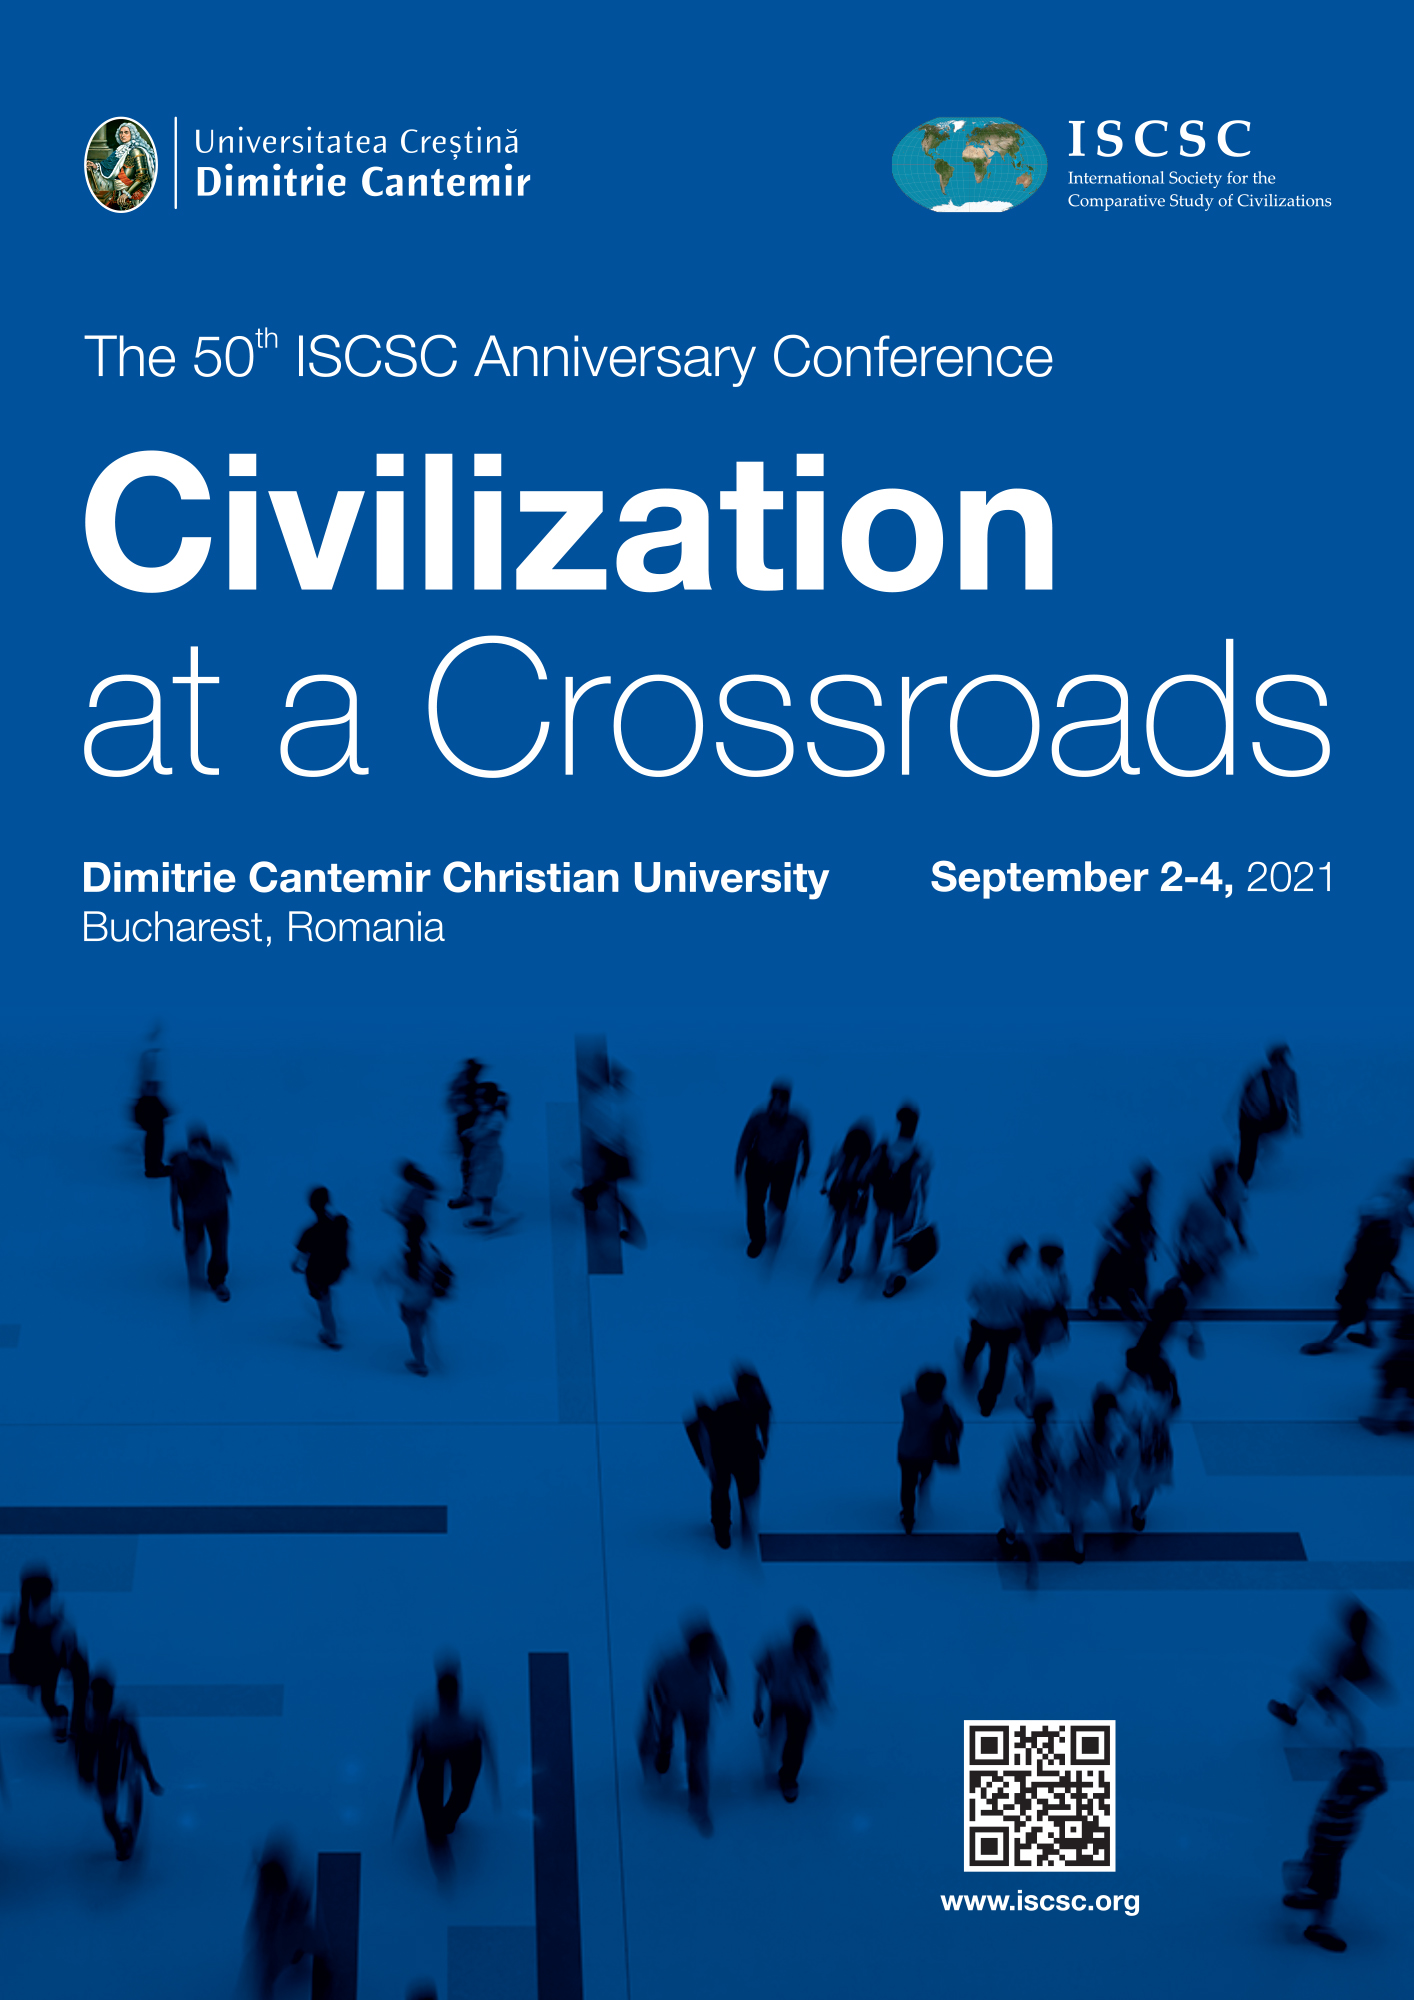 ”Civilization at a crossroads” - Anniversary conference of ISCSC